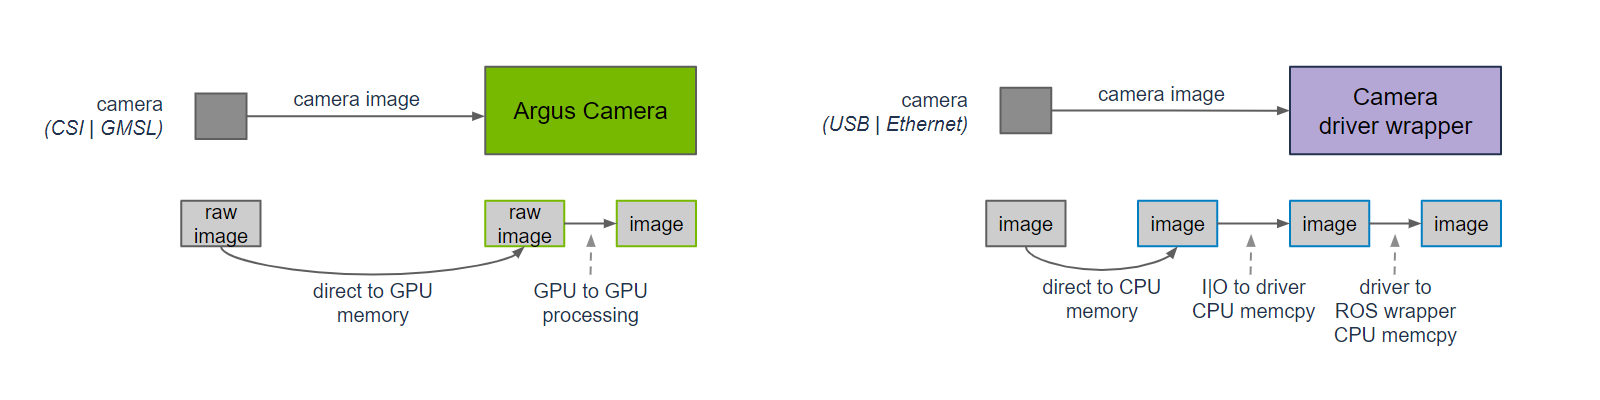 https://media.githubusercontent.com/media/NVIDIA-ISAAC-ROS/.github/main/resources/isaac_ros_docs/repositories_and_packages/isaac_ros_argus_camera/isaac_ros_argus_camera_zeromemcpy.png/